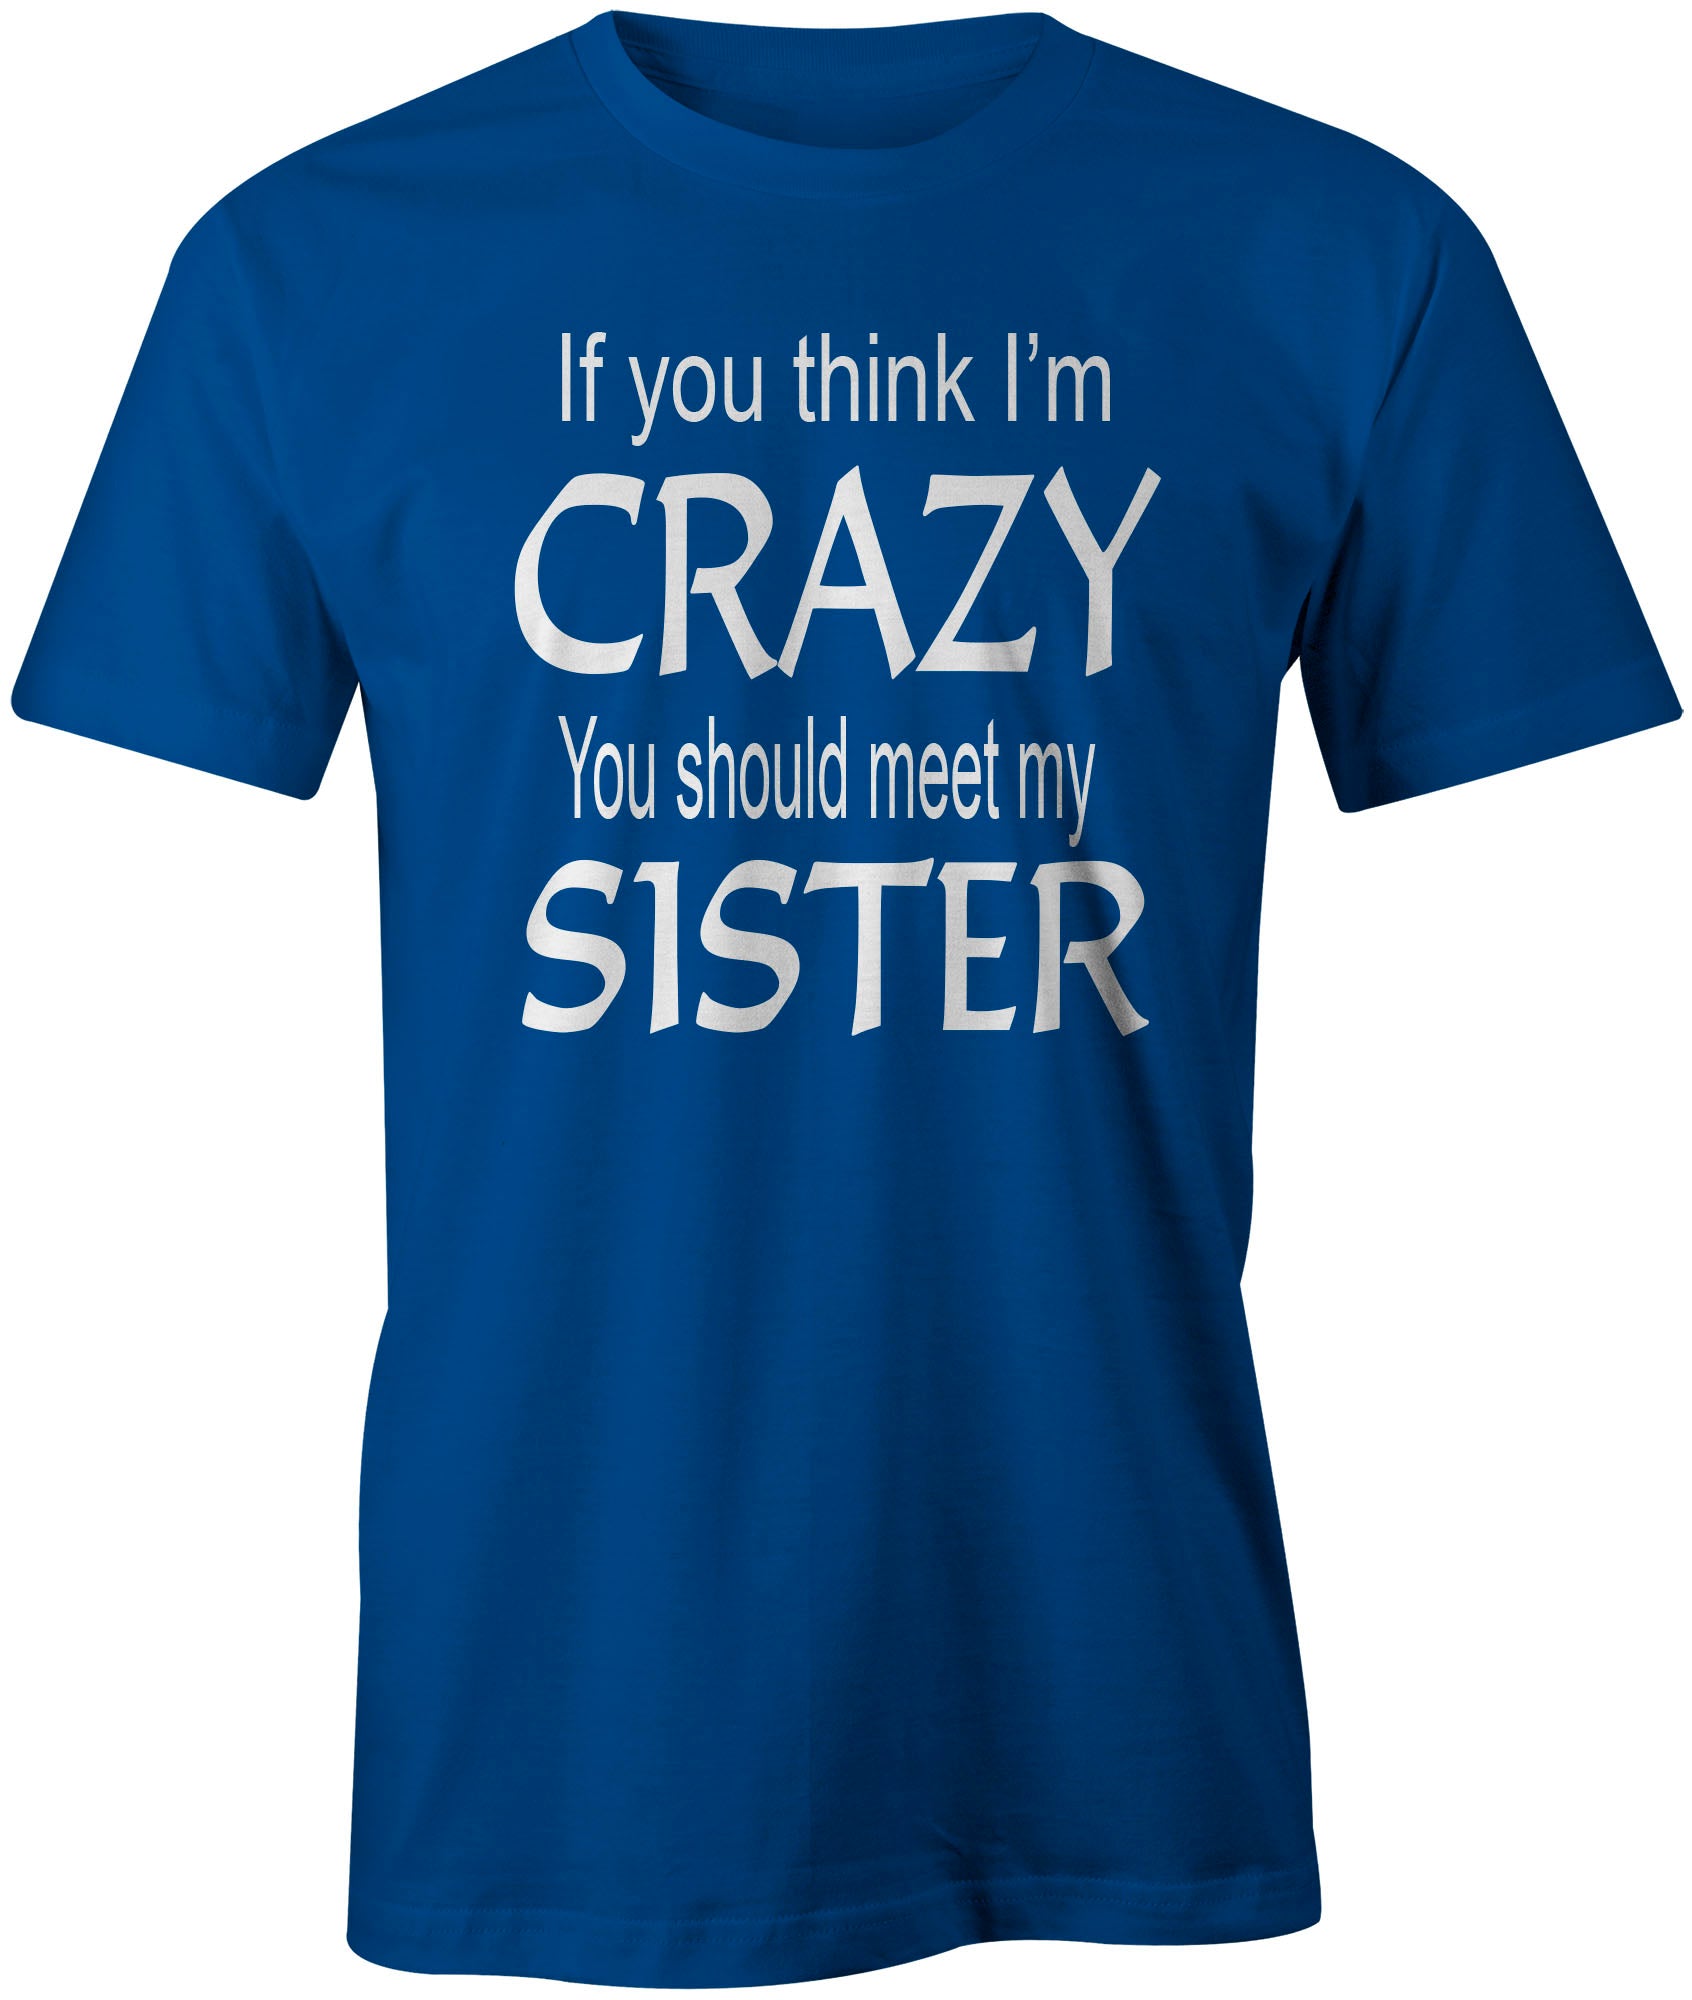 Men's If you think I'm Crazy You Should Meet My Sister T-Shirts | eBay